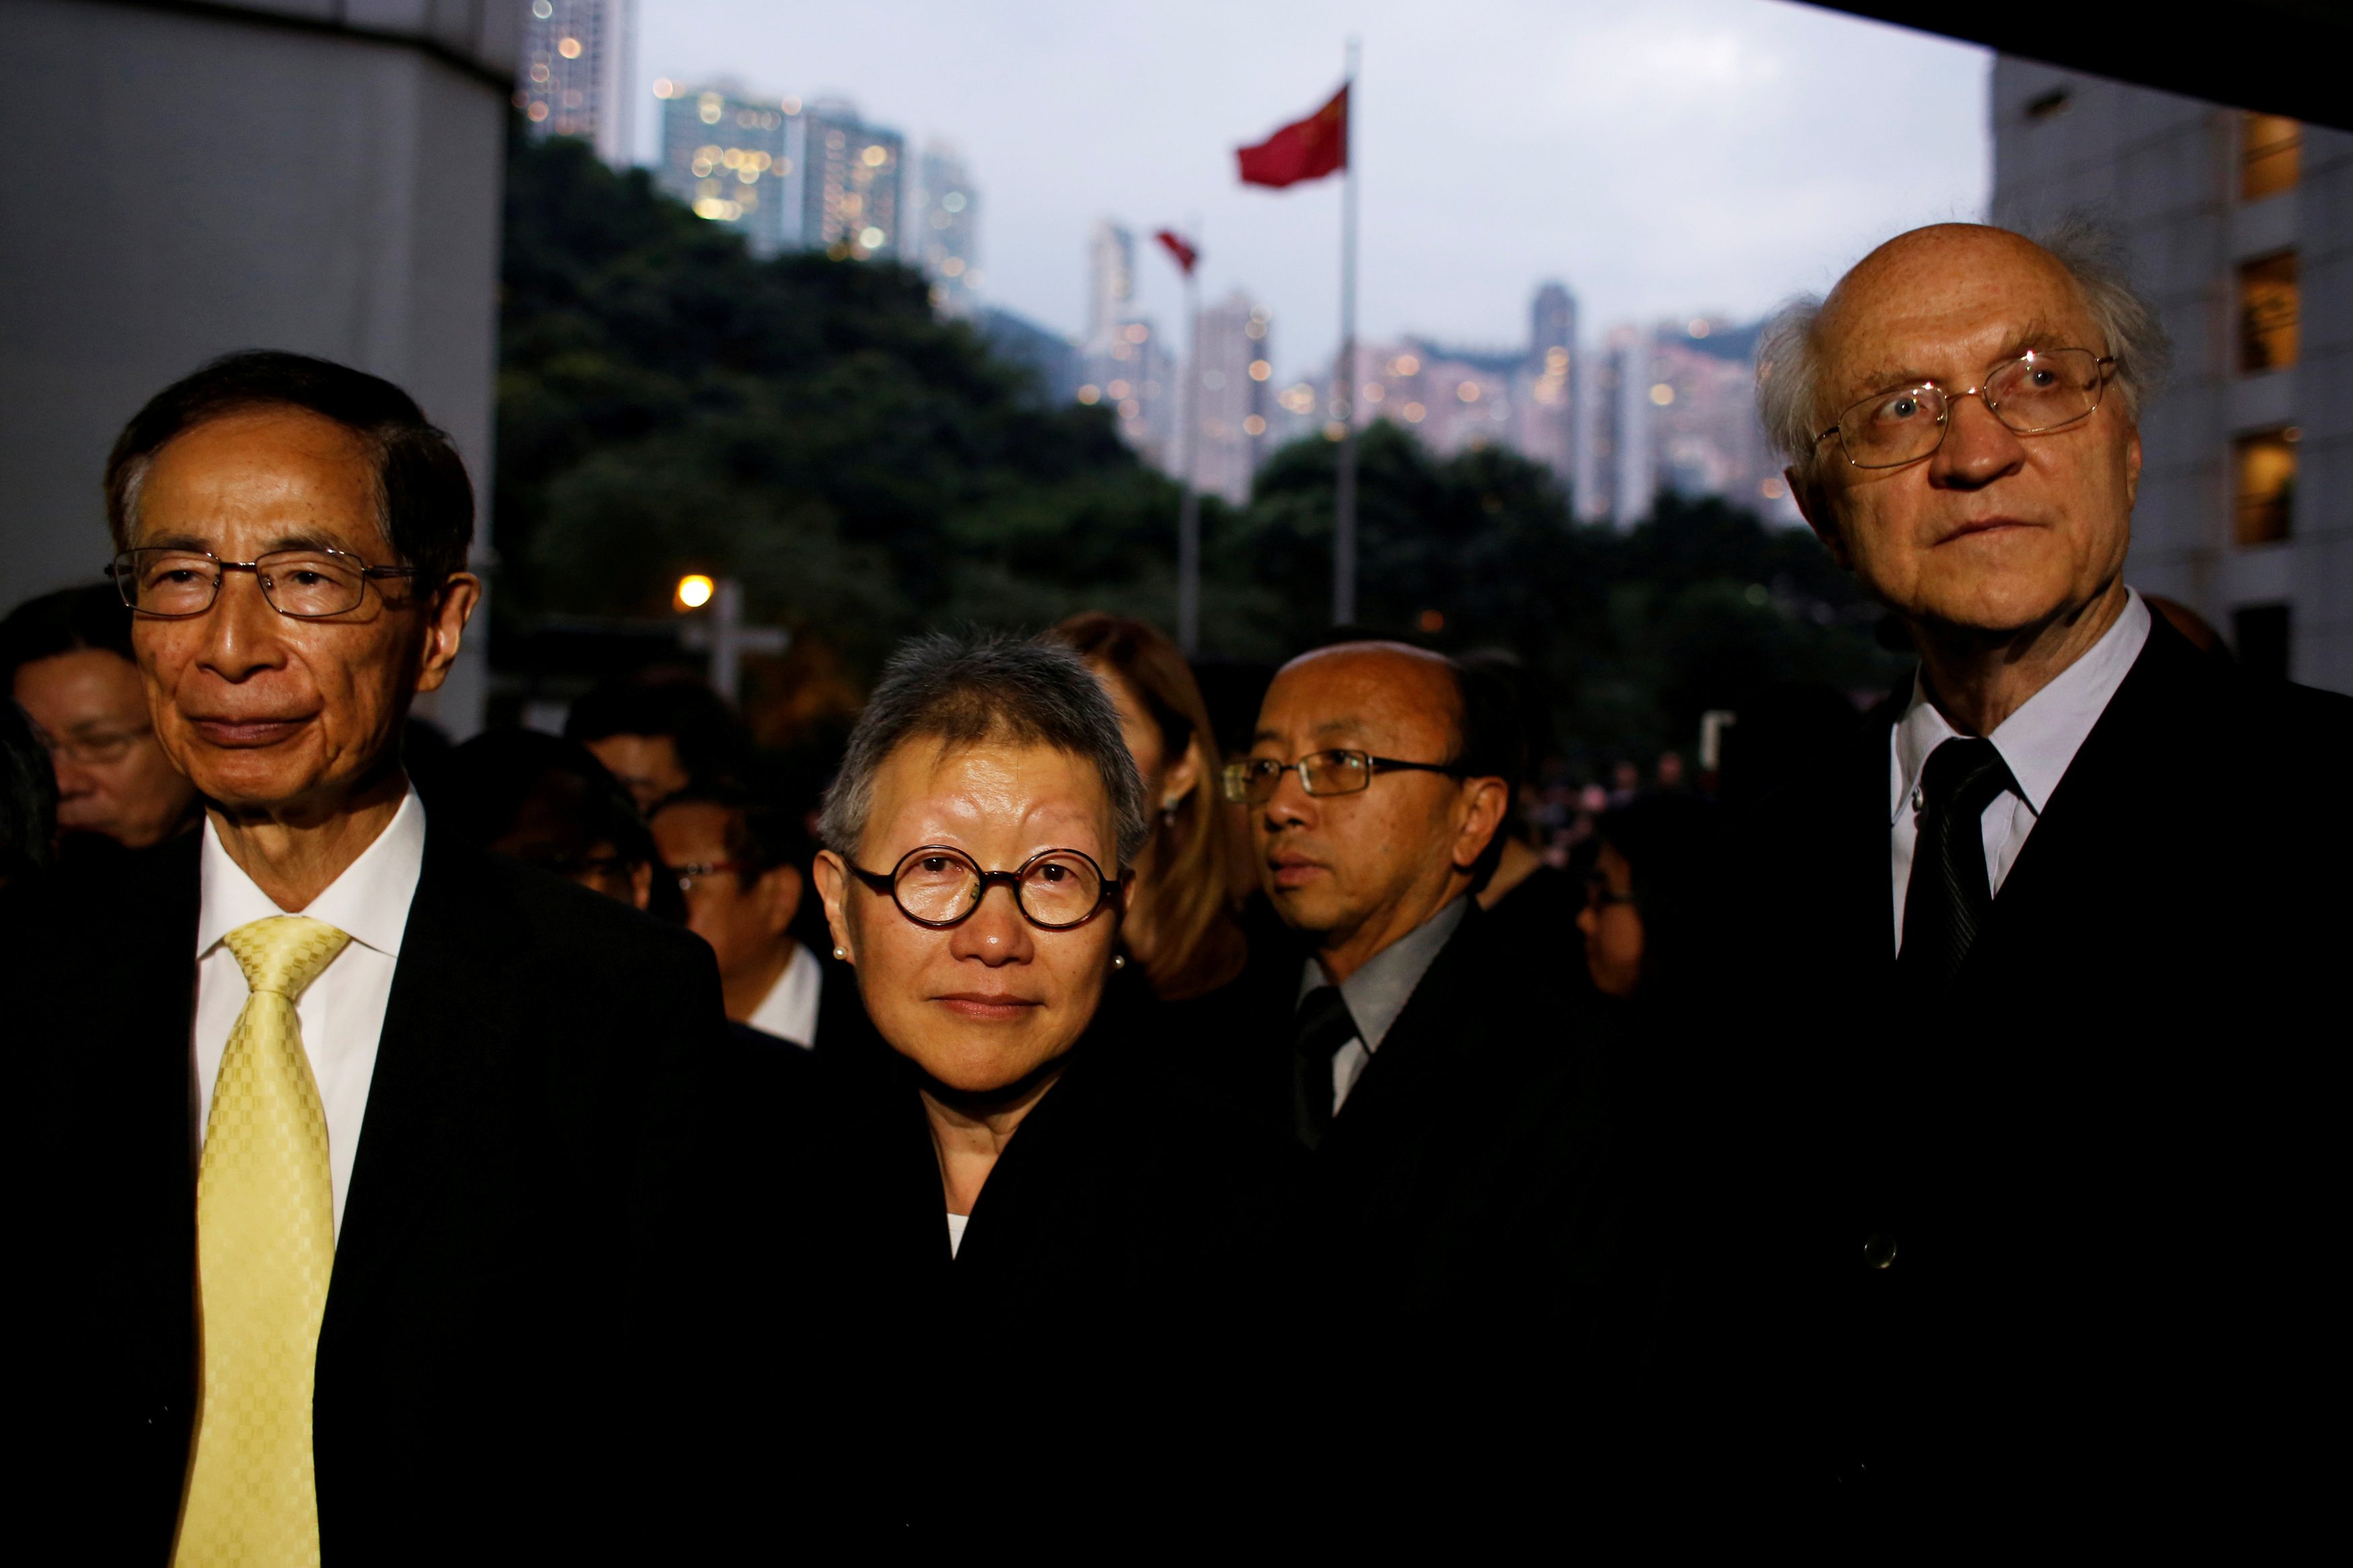 American lawyer arrested by Hong Kong police in national security crackdown